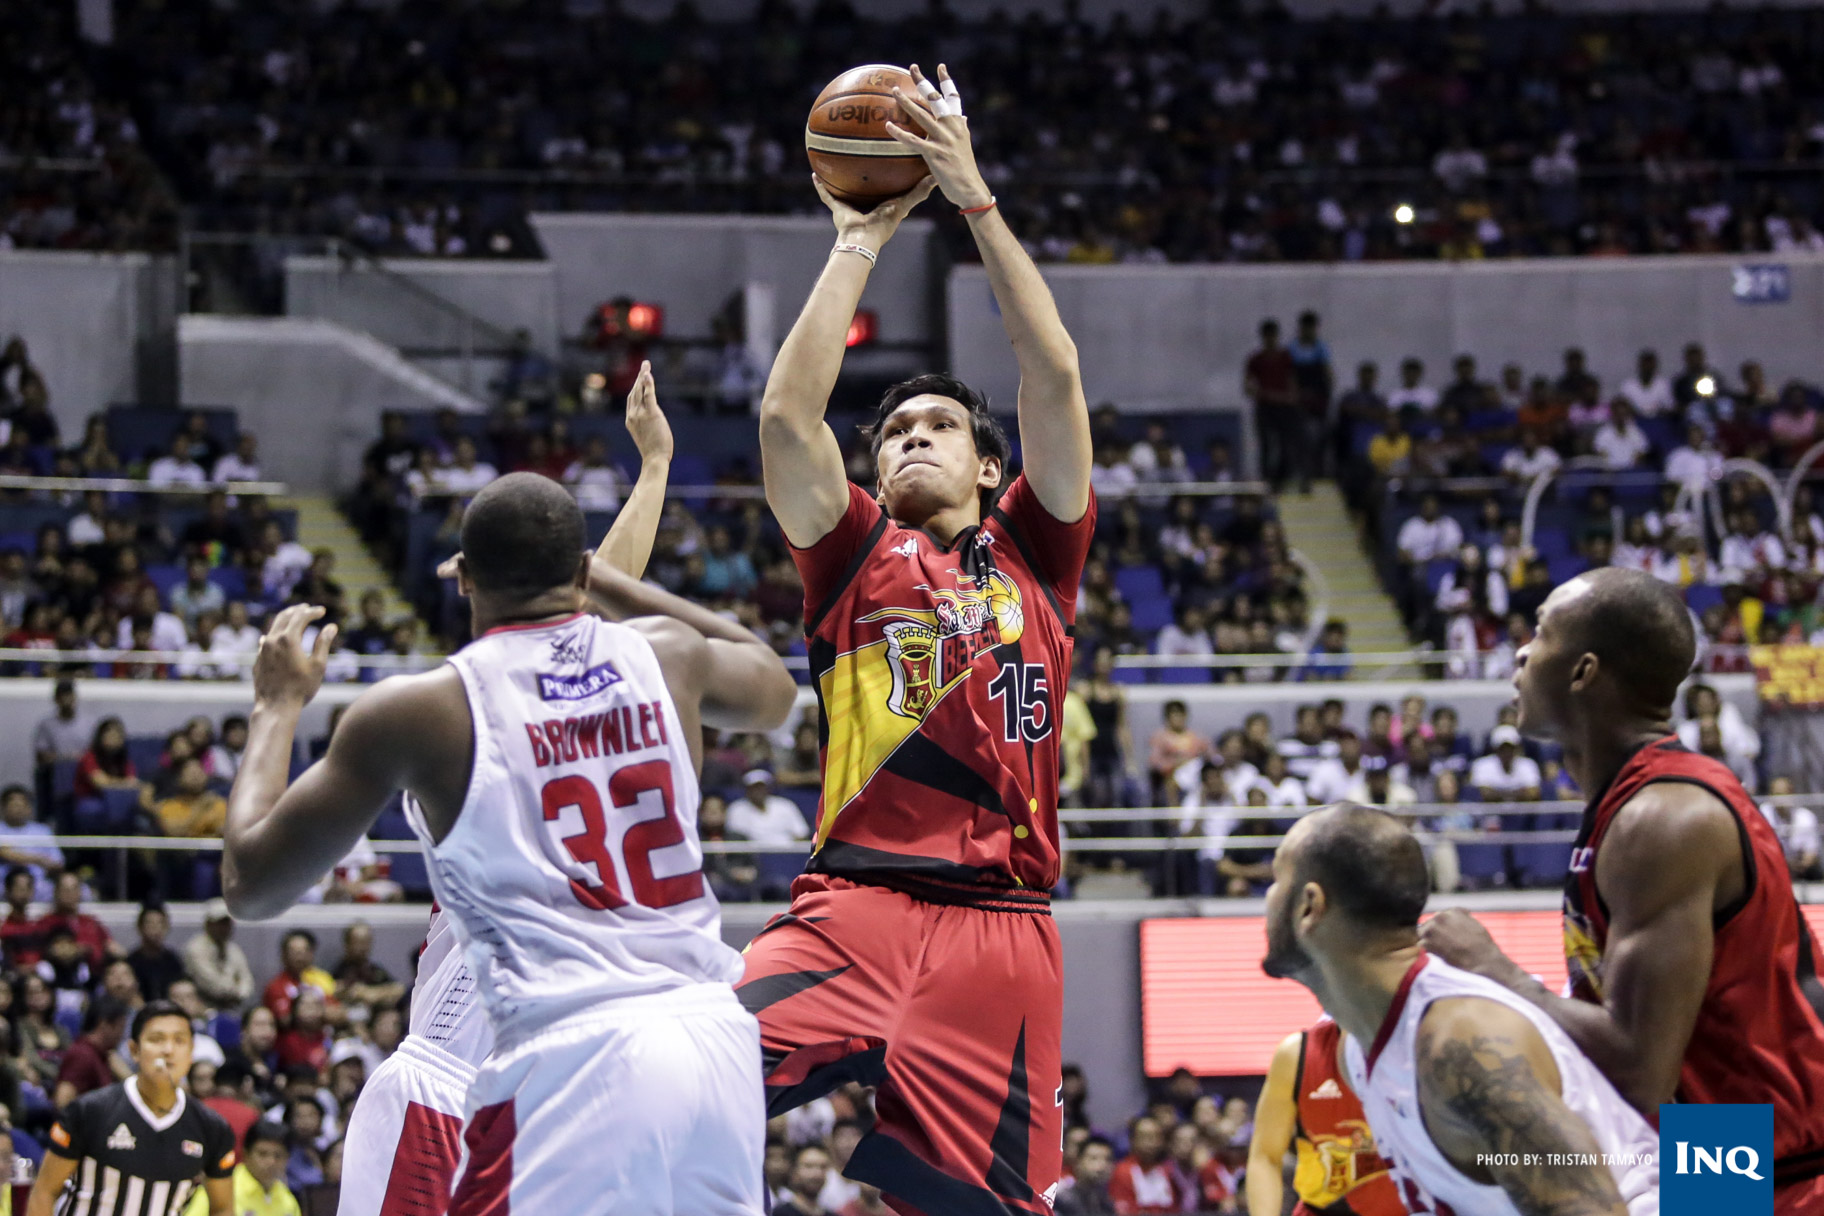 June Mar Fajardo goes up for a shot. Photo by Tristan Tamayo/INQUIRER.net